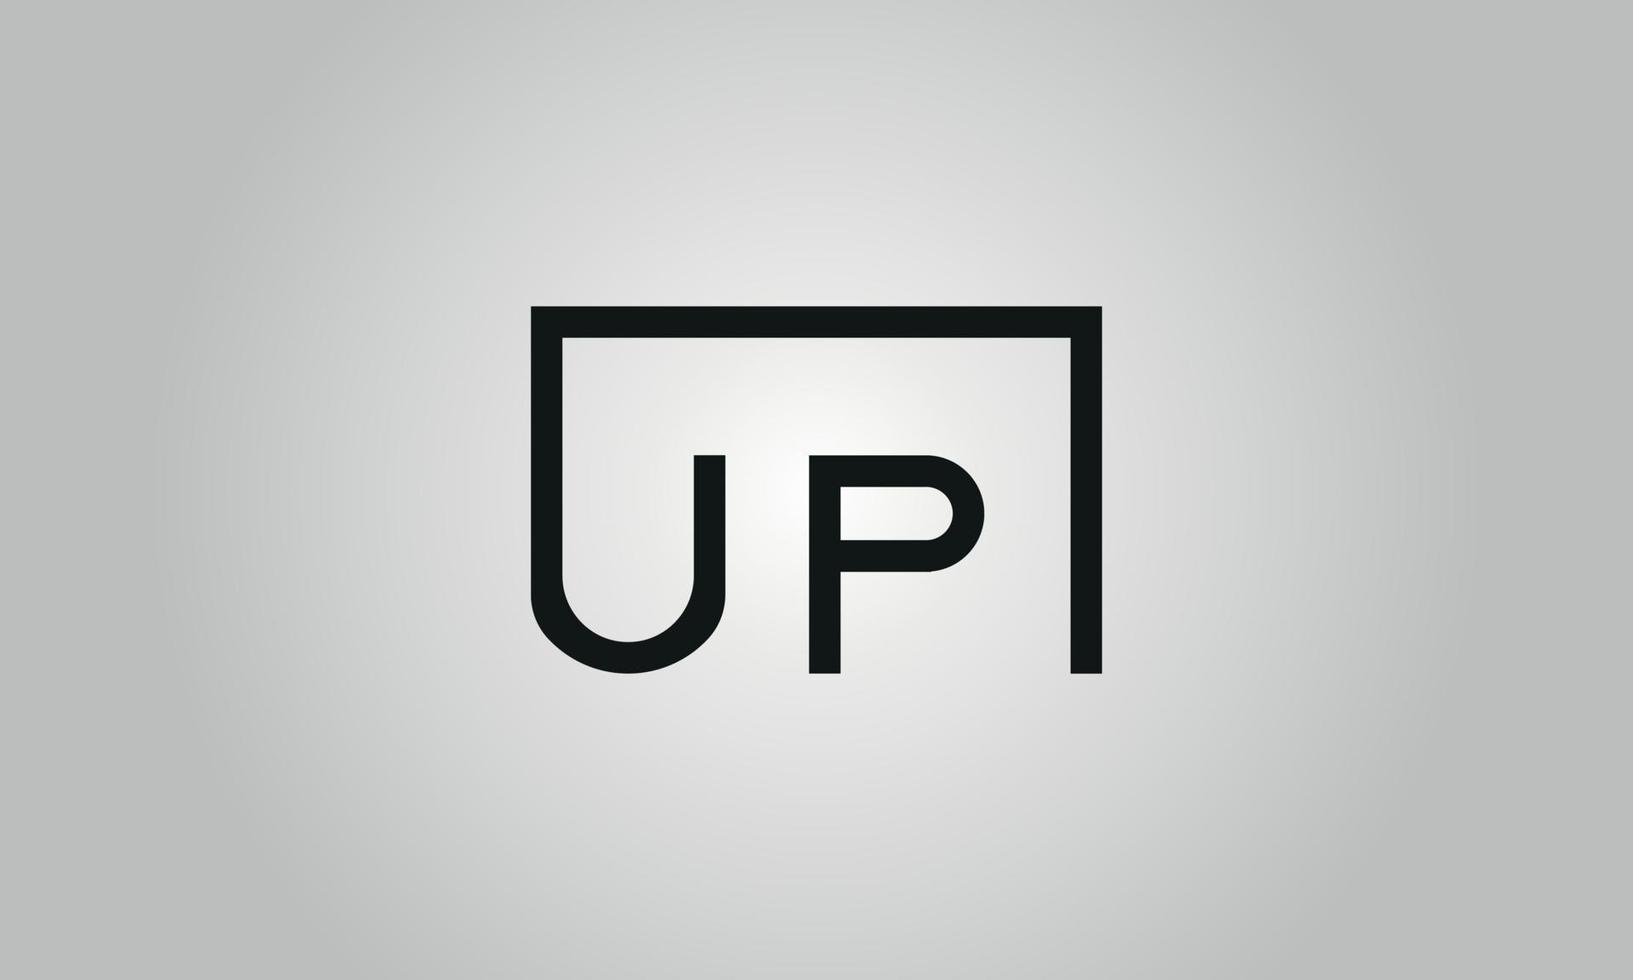 Letter UP logo design. UP logo with square shape in black colors vector free vector template.